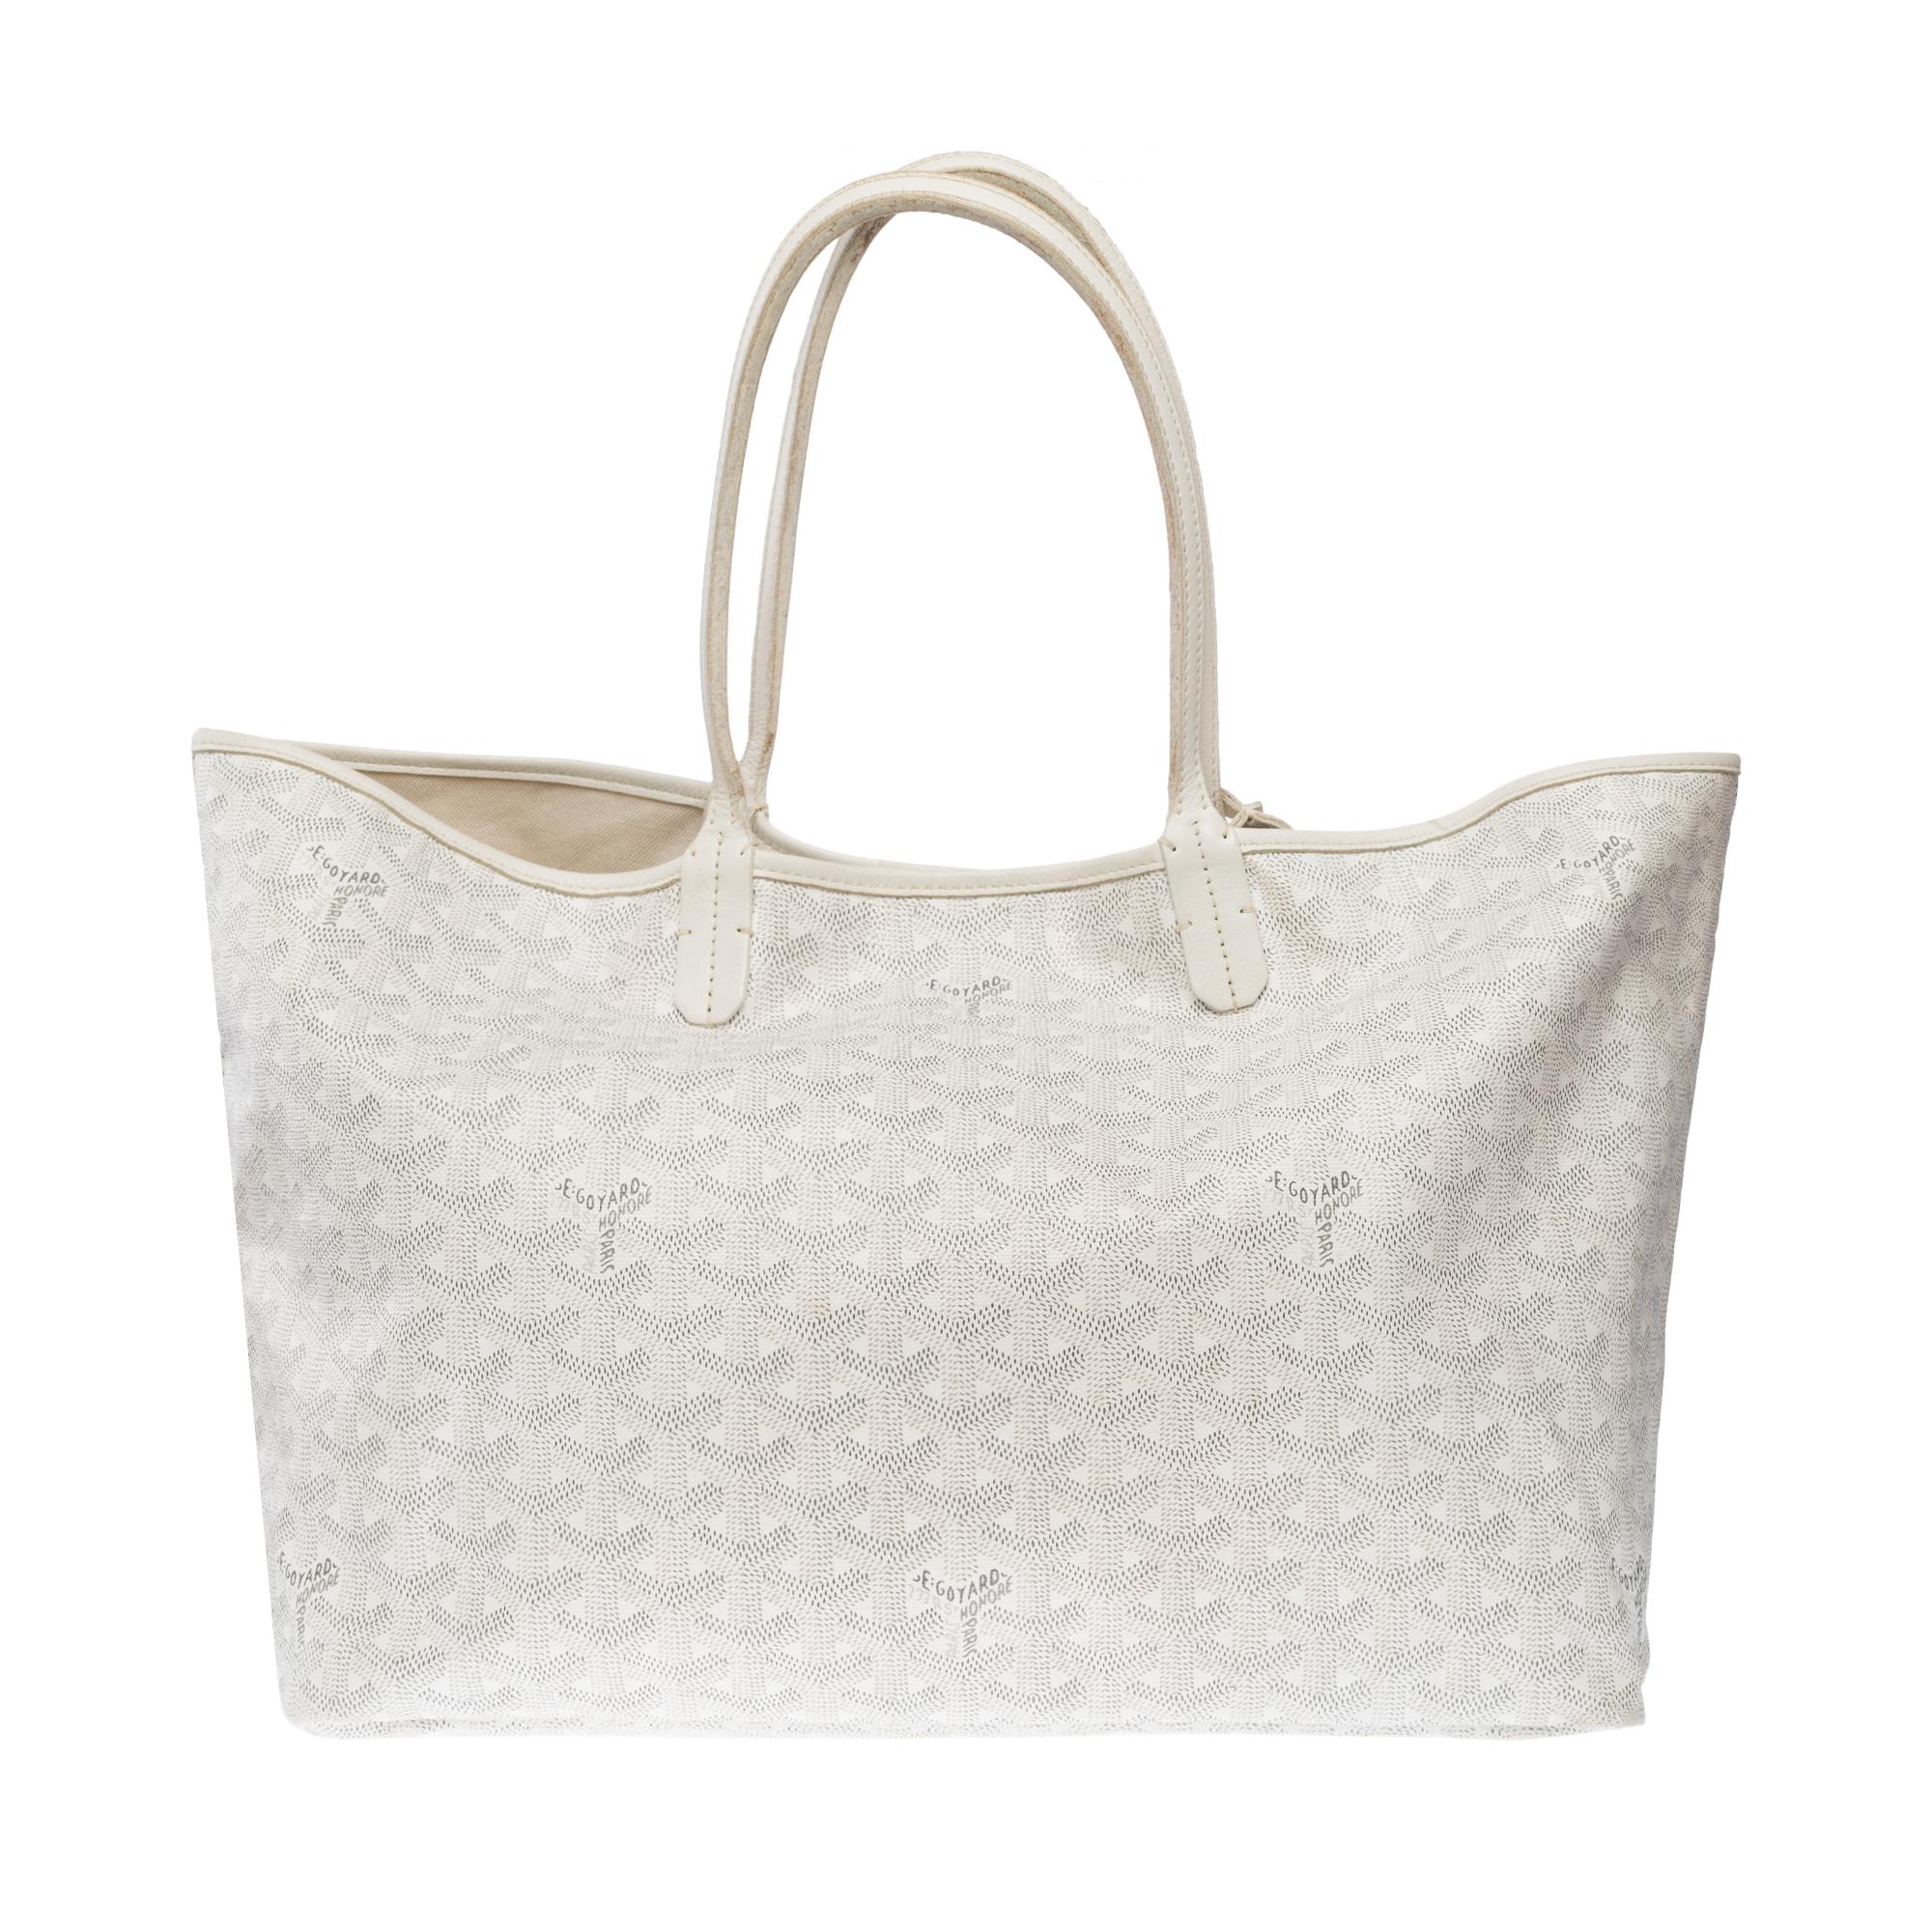 Women's The Coveted Goyard Saint-Louis PM Tote bag in White canvas and leather, SHW